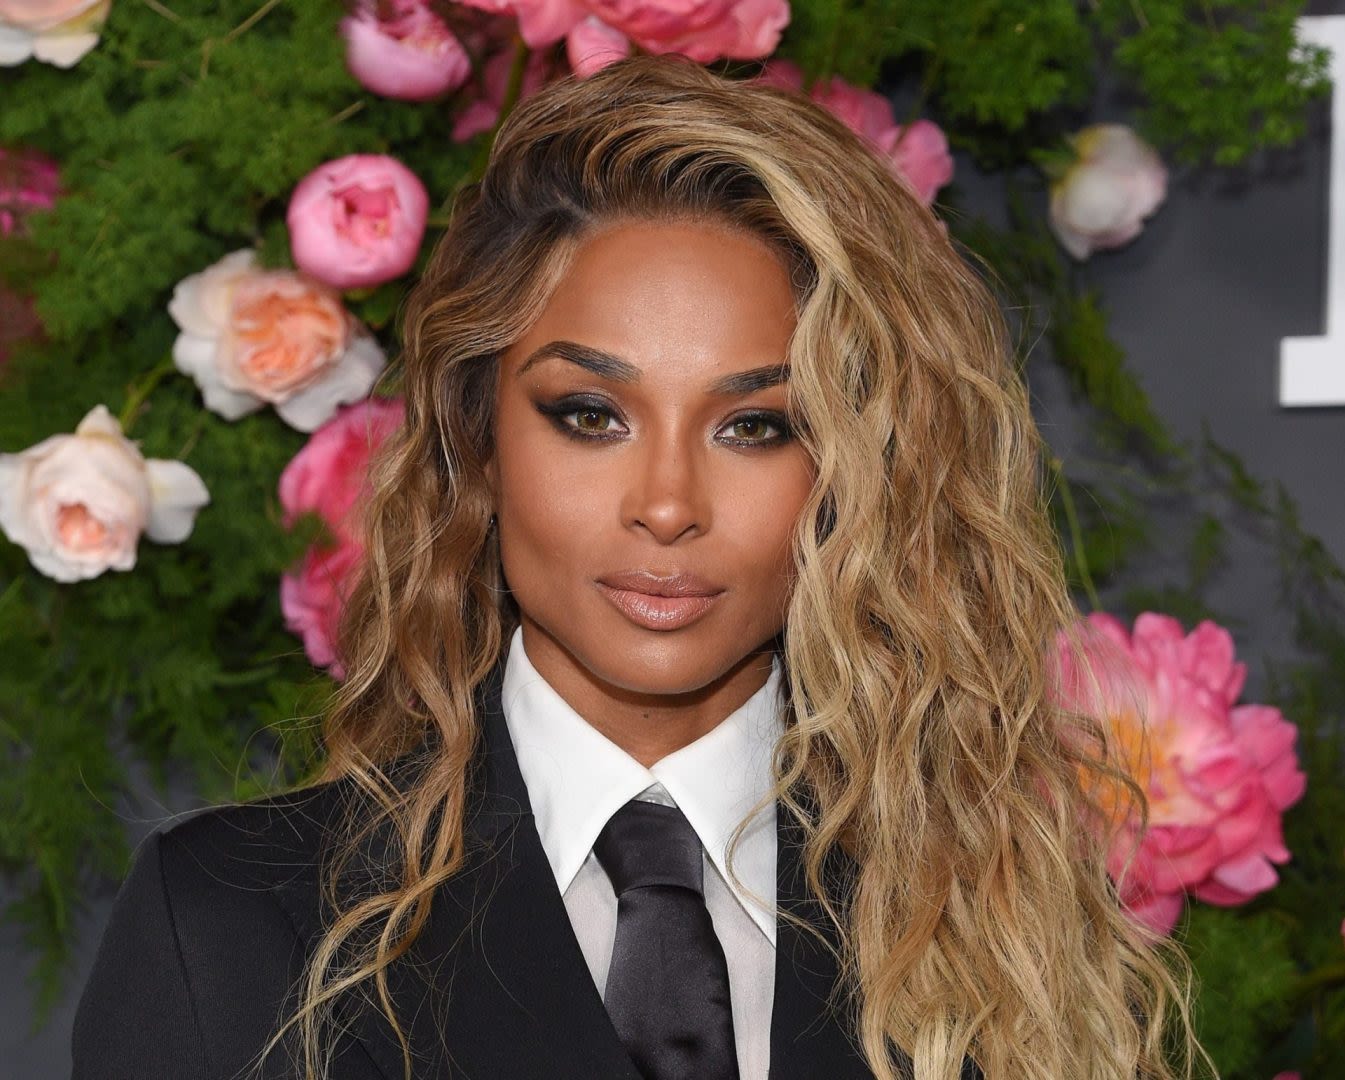 Ciara stands by Serena Williams amid online criticism over appearance